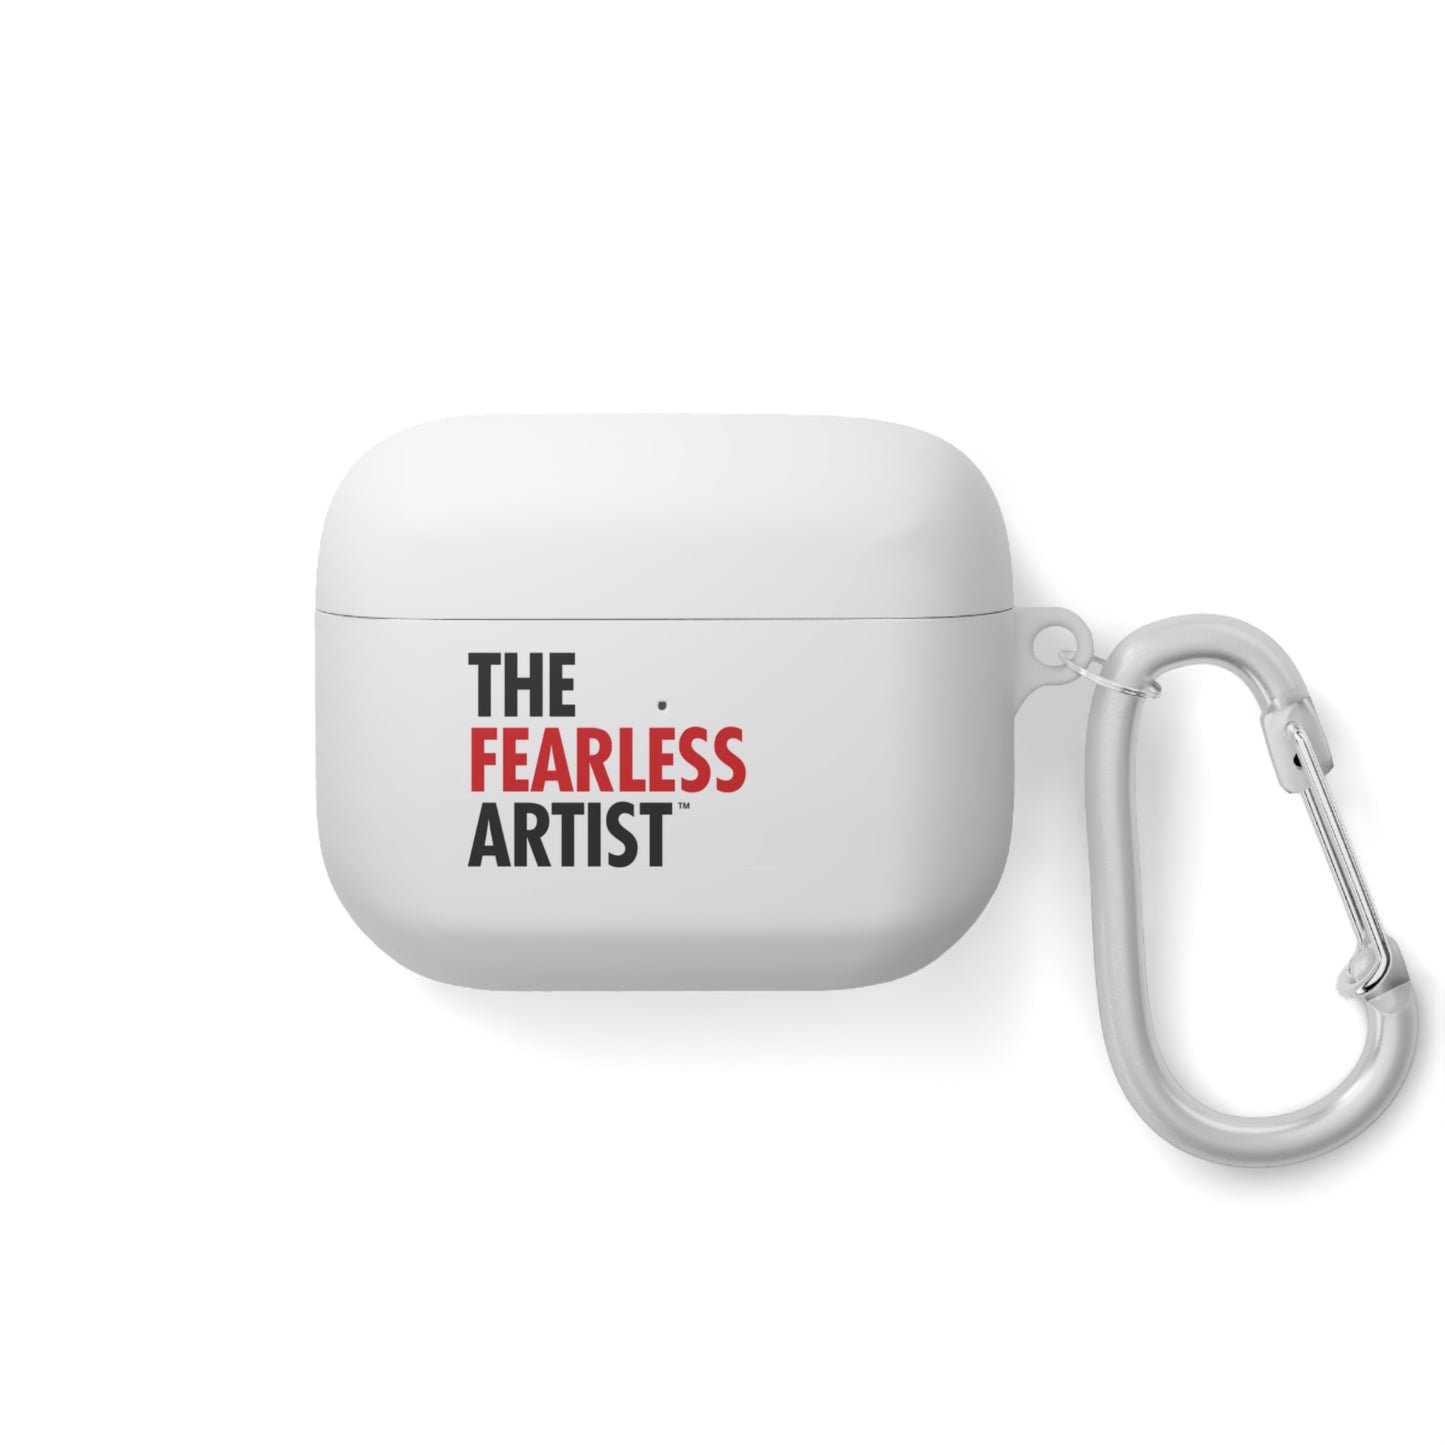 AirPods and AirPods Pro Case Cover - The Fearless Artist (Black and Red)